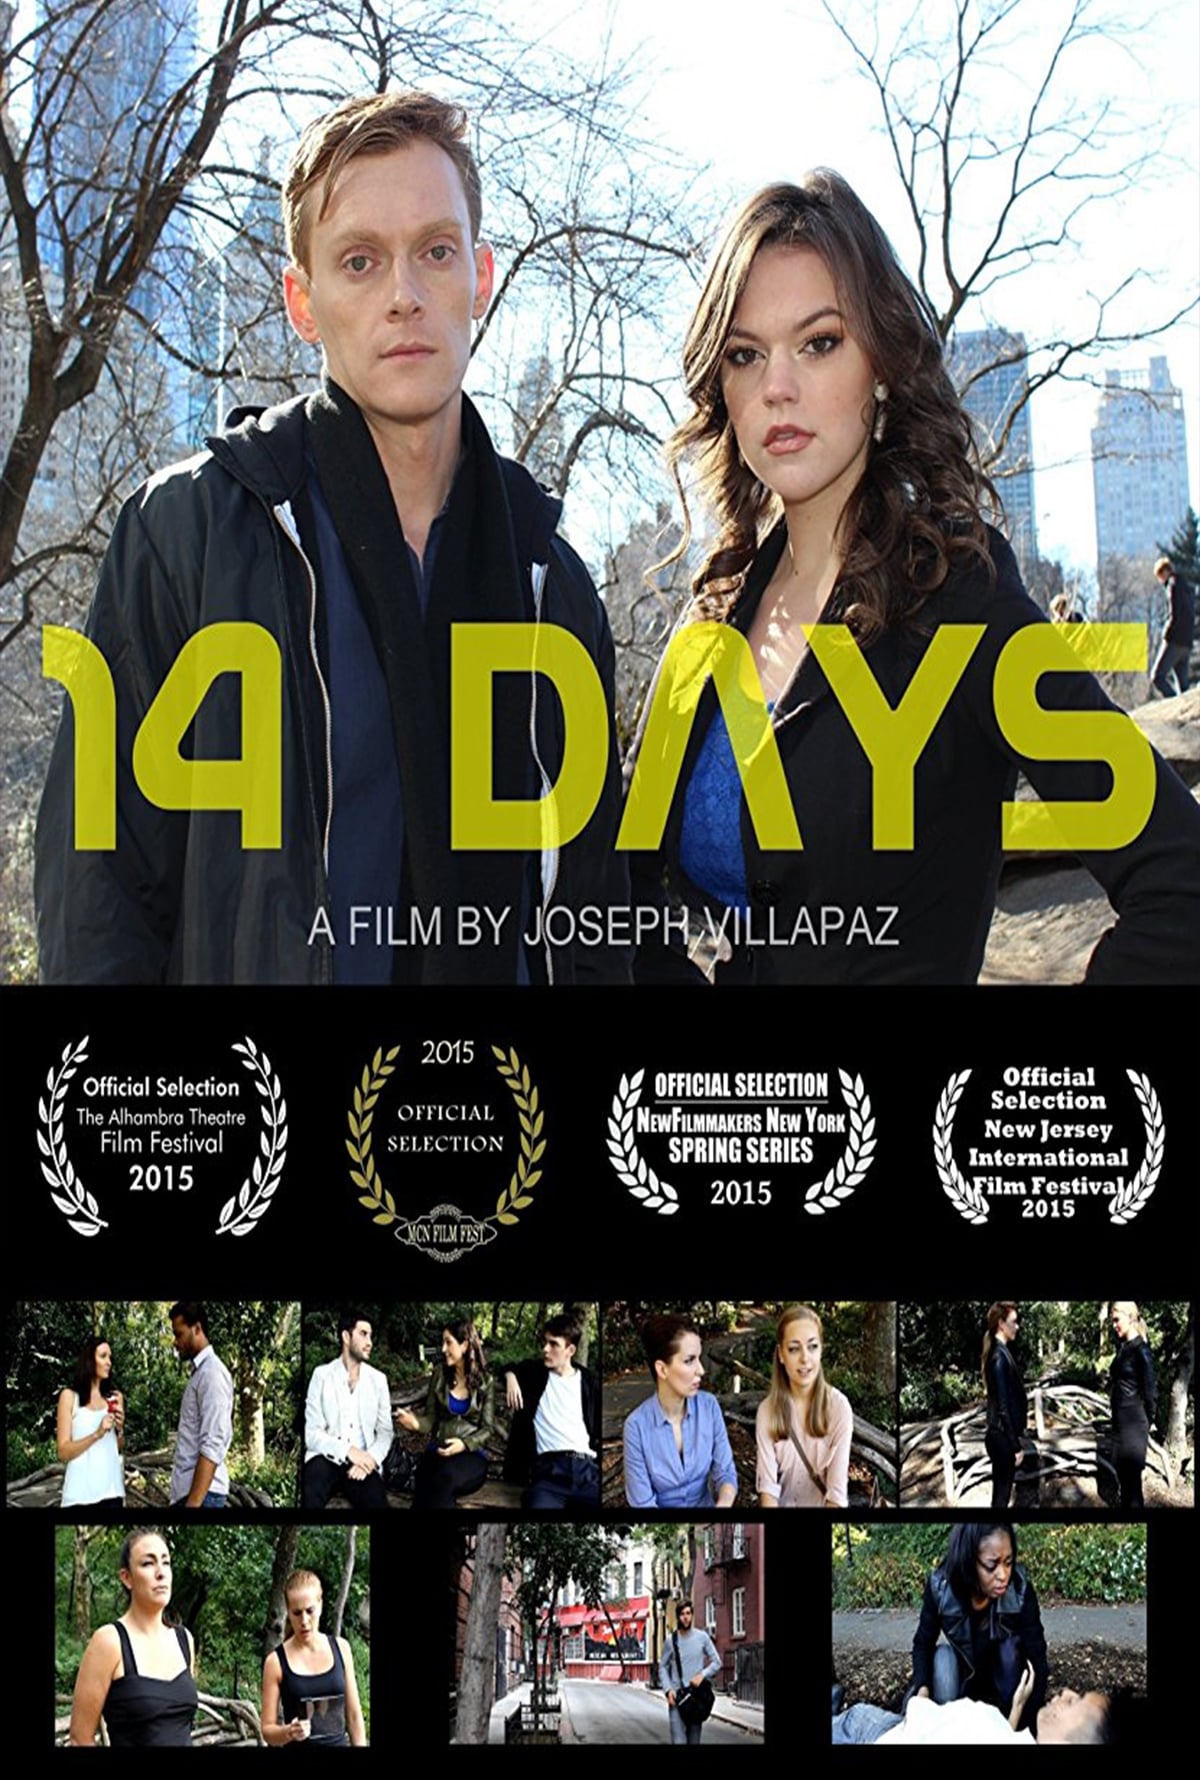 14 Days on FREECABLE TV